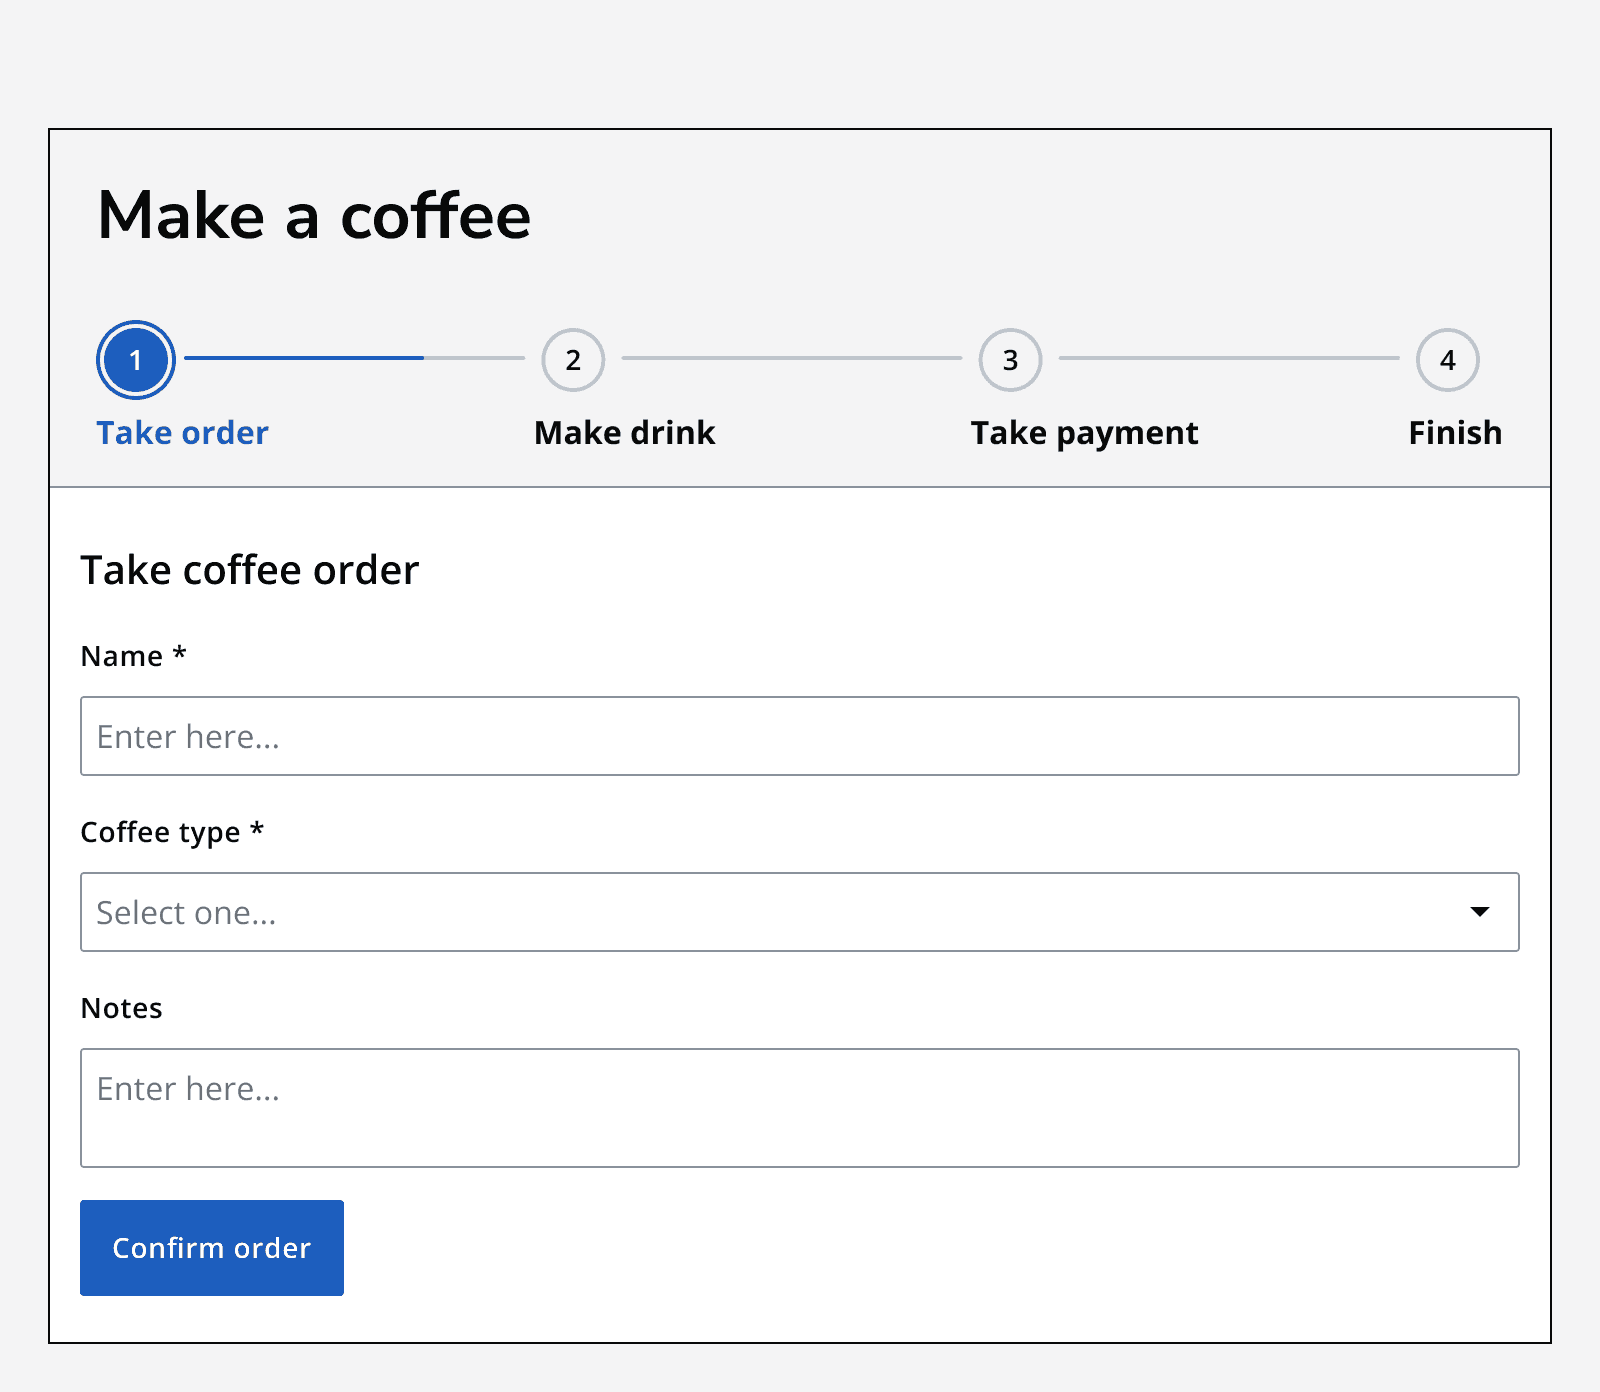 An image showing a form titled 'Make a coffee' featuring a stepper with four steps, titled 'Take order', 'Make drink', 'Take payment', and 'Finish'. The first step is selected, and the page below shows three input fields and a button labelled 'Confirm order'.